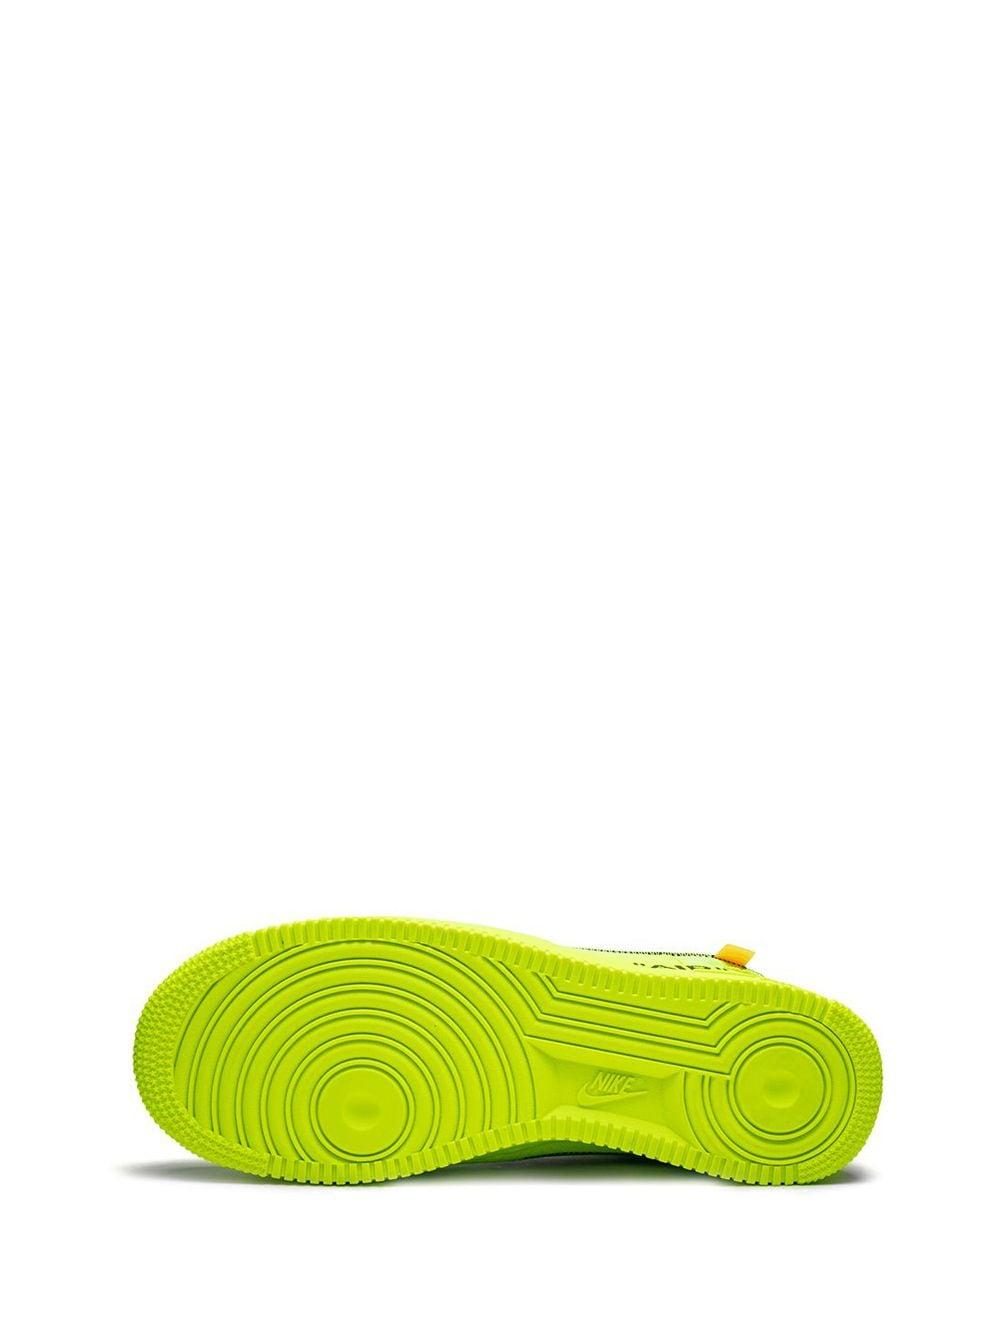 Nike Air Force 1 07 LV8 Volt Yellow and White Sneaker Editorial Photography  - Image of lifestyle, back: 181758957